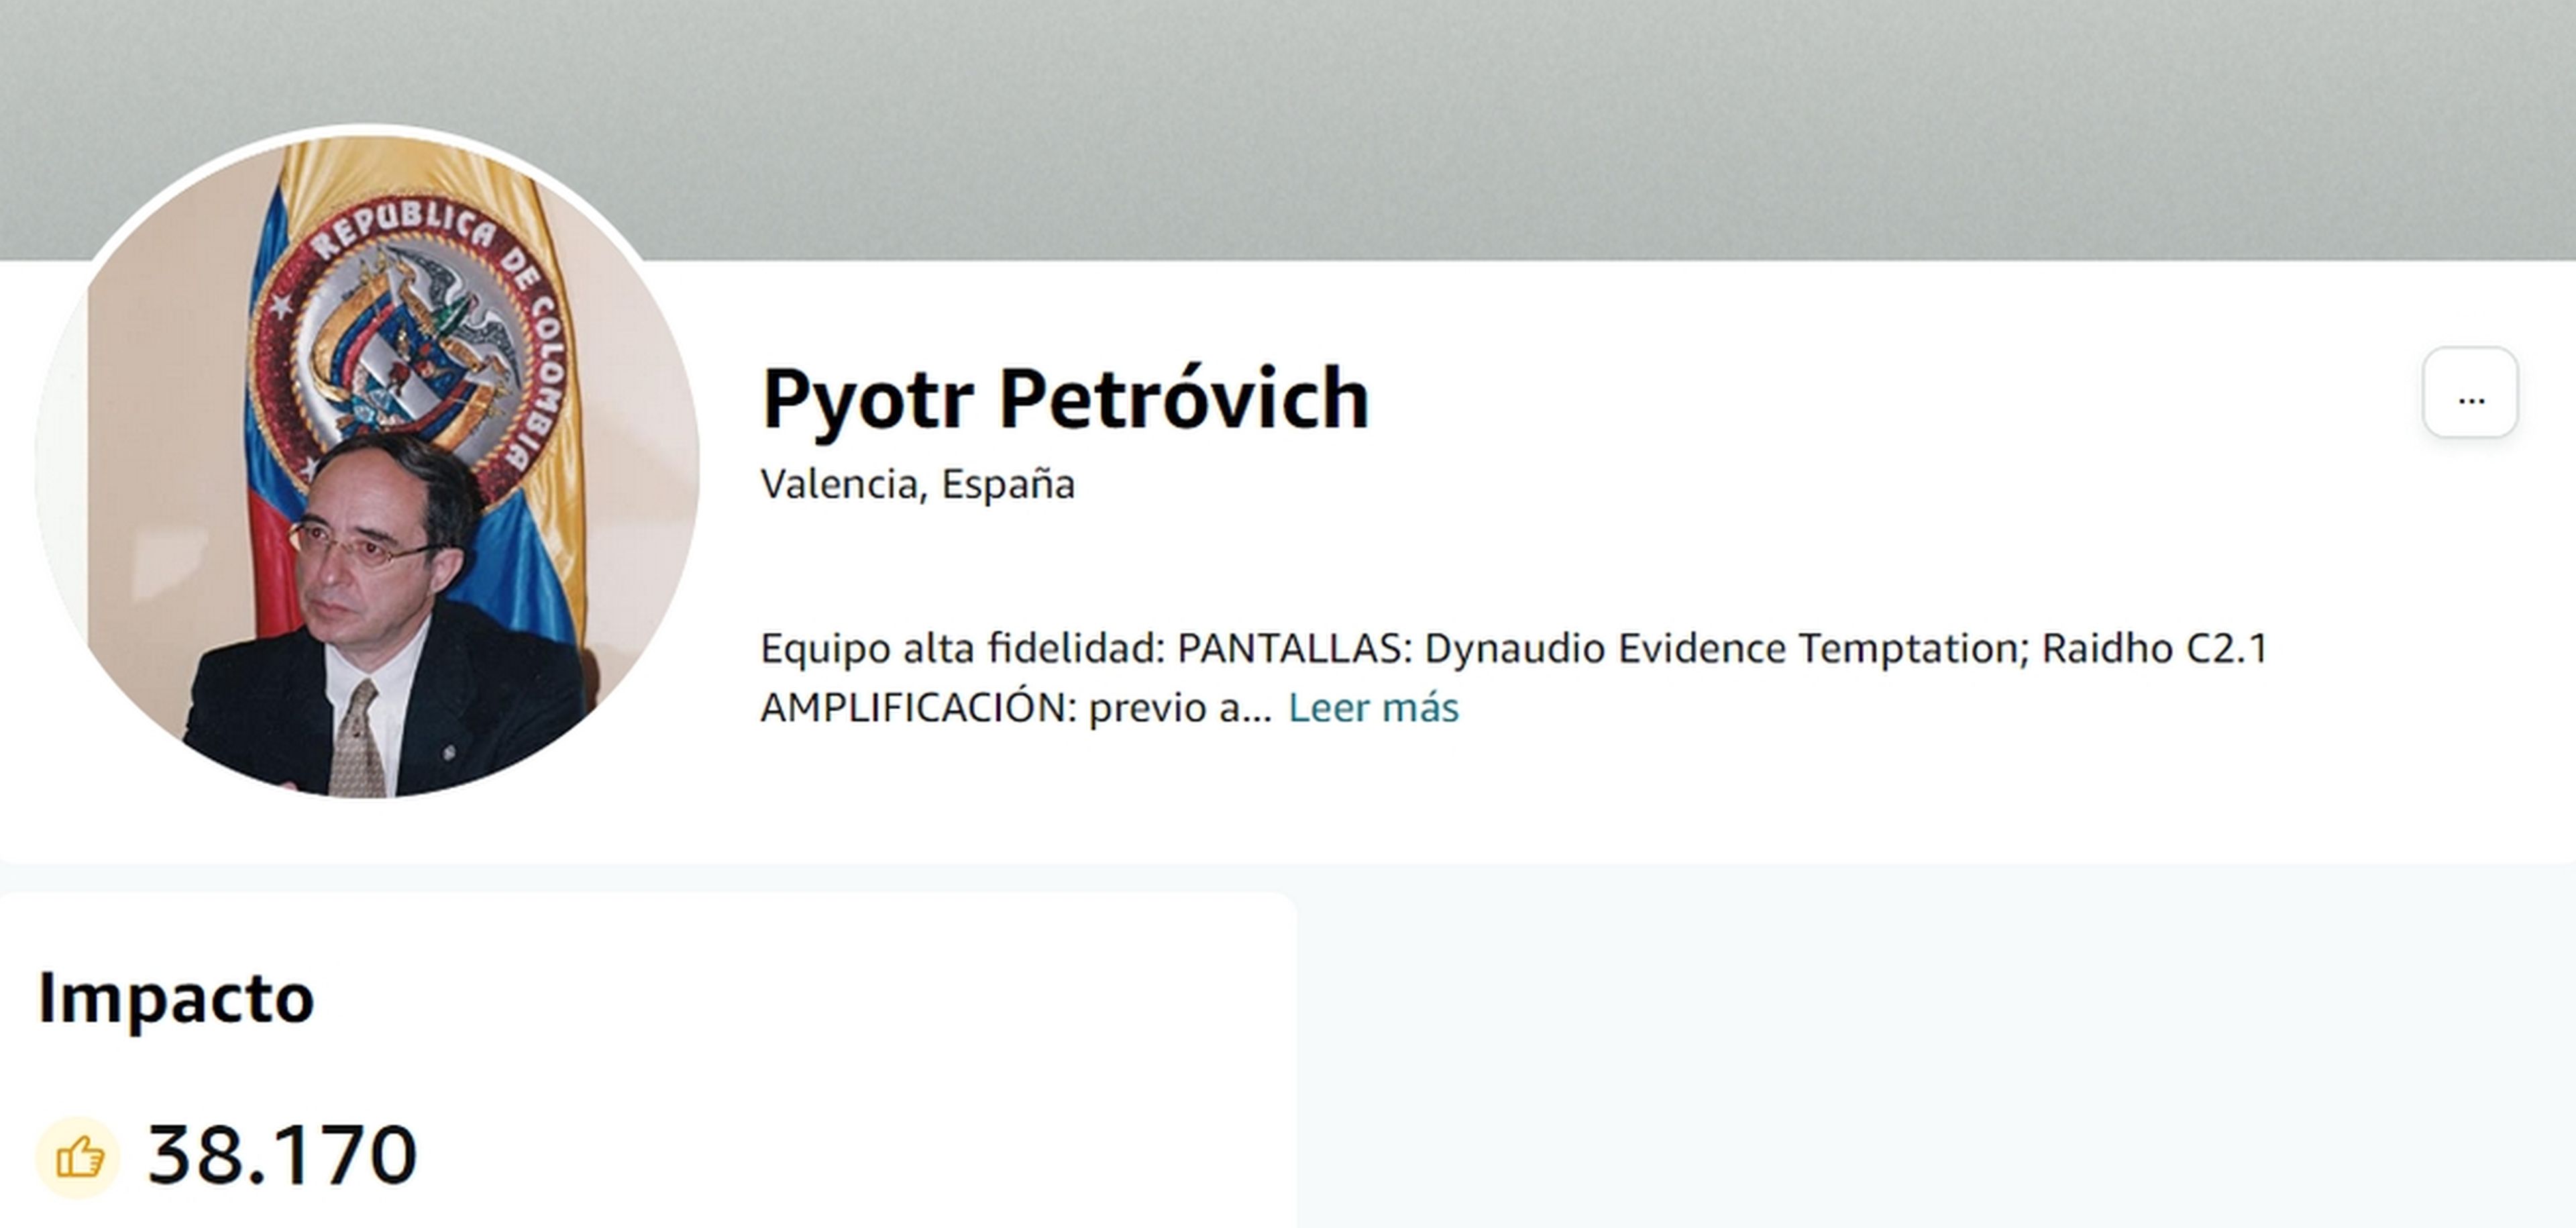 Pyotr Petrovich, the mysterious Spanish Amazon user with thousands of classical music reviews and a dream team